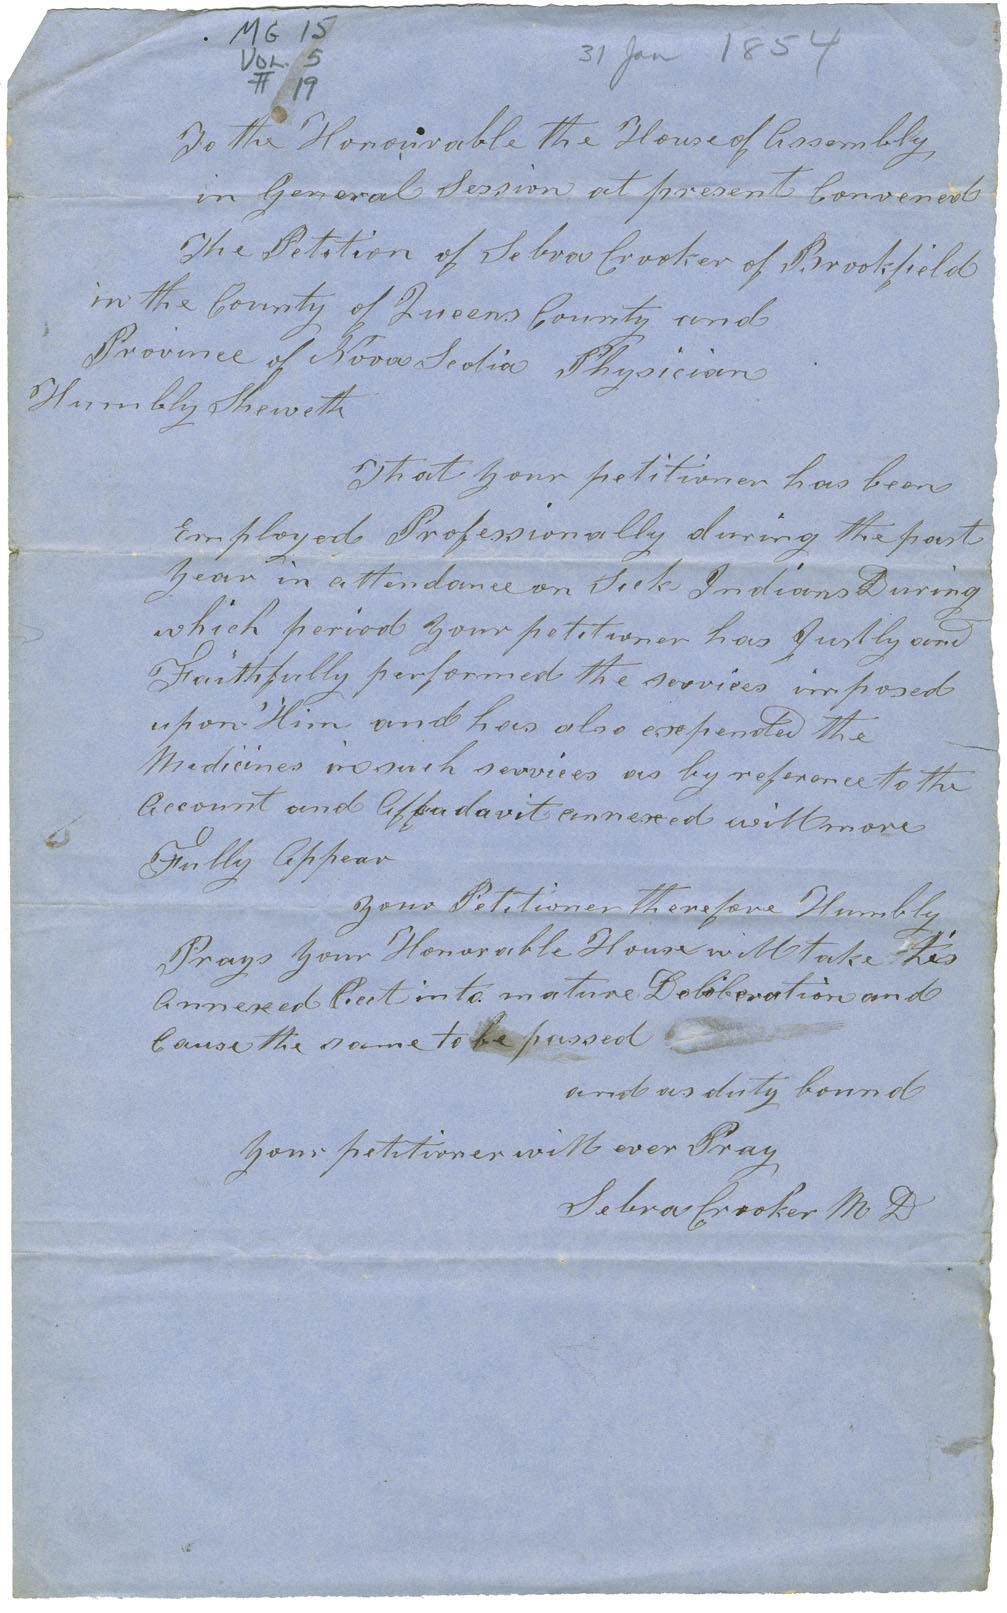 Petition of Dr. Crooker of Brookfield, Queens county, for payments for services to sick Mi'kmaq, with supporting letter from the Overseers of the Poor for the county.